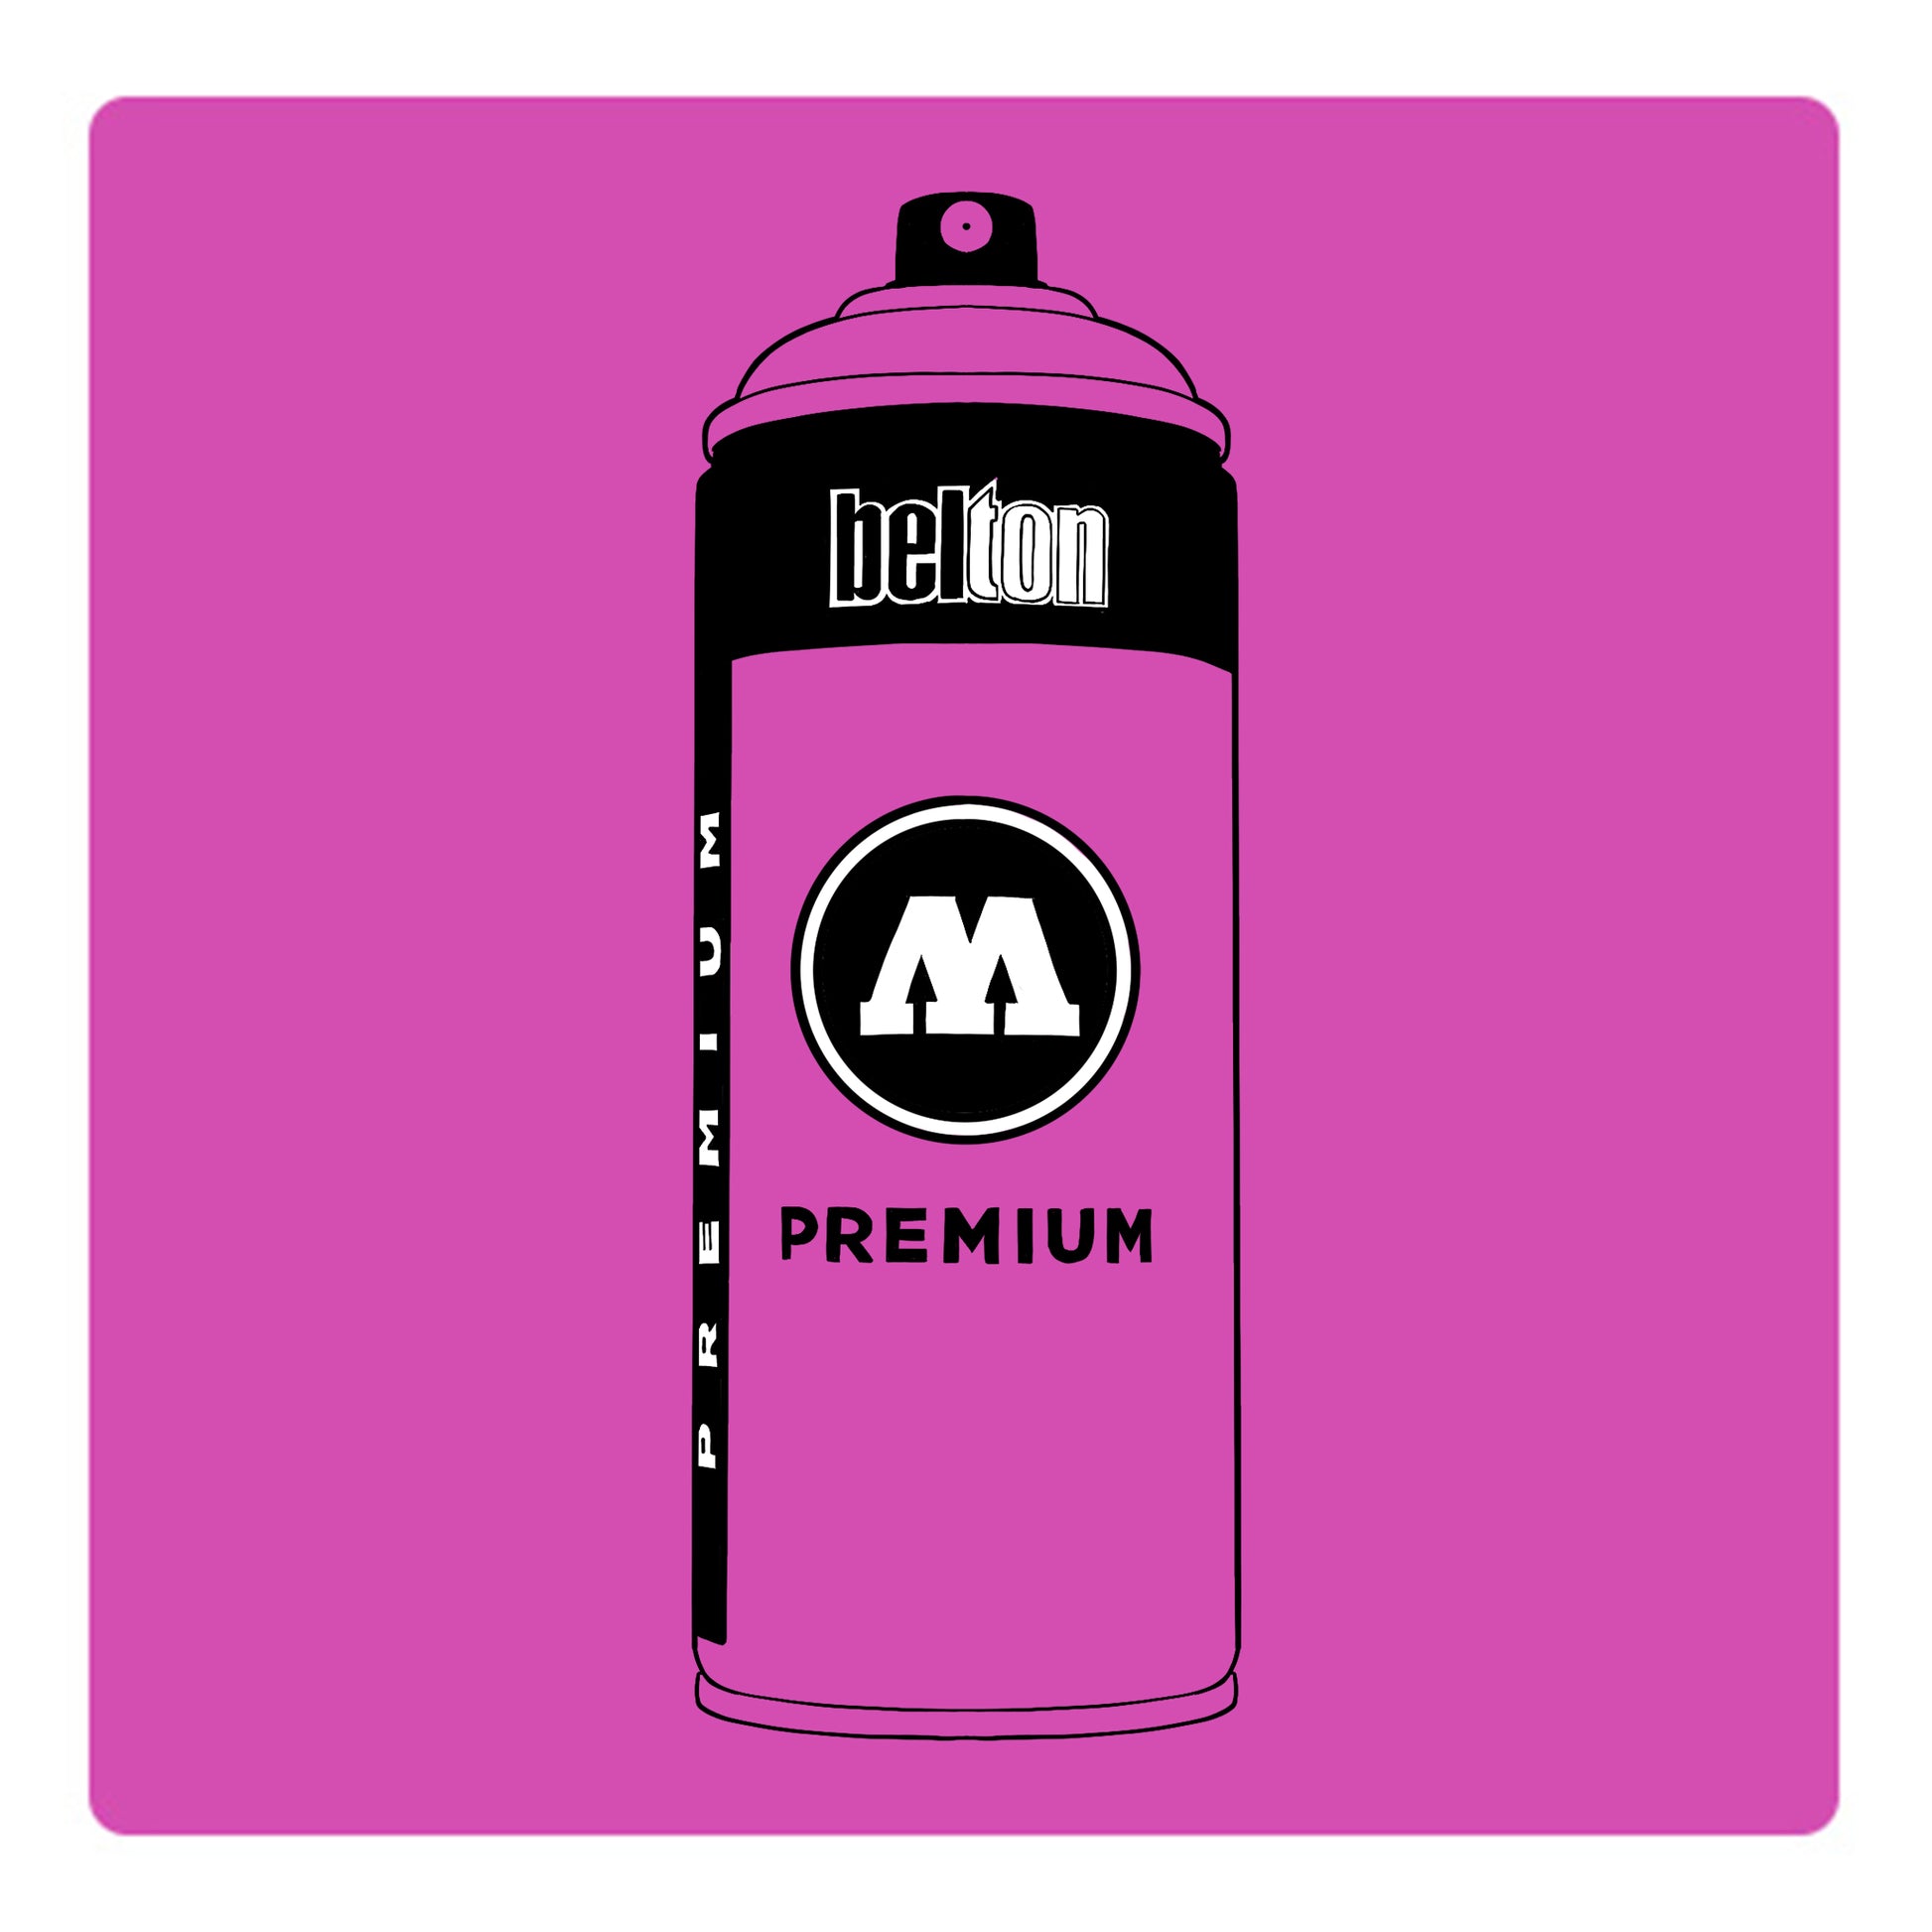 A black outline drawing of a neon pink spray paint can with the words "belton","premium" and the letter"M" written on the face in black and white font. The background is a color swatch of the same neon pink with a white border.